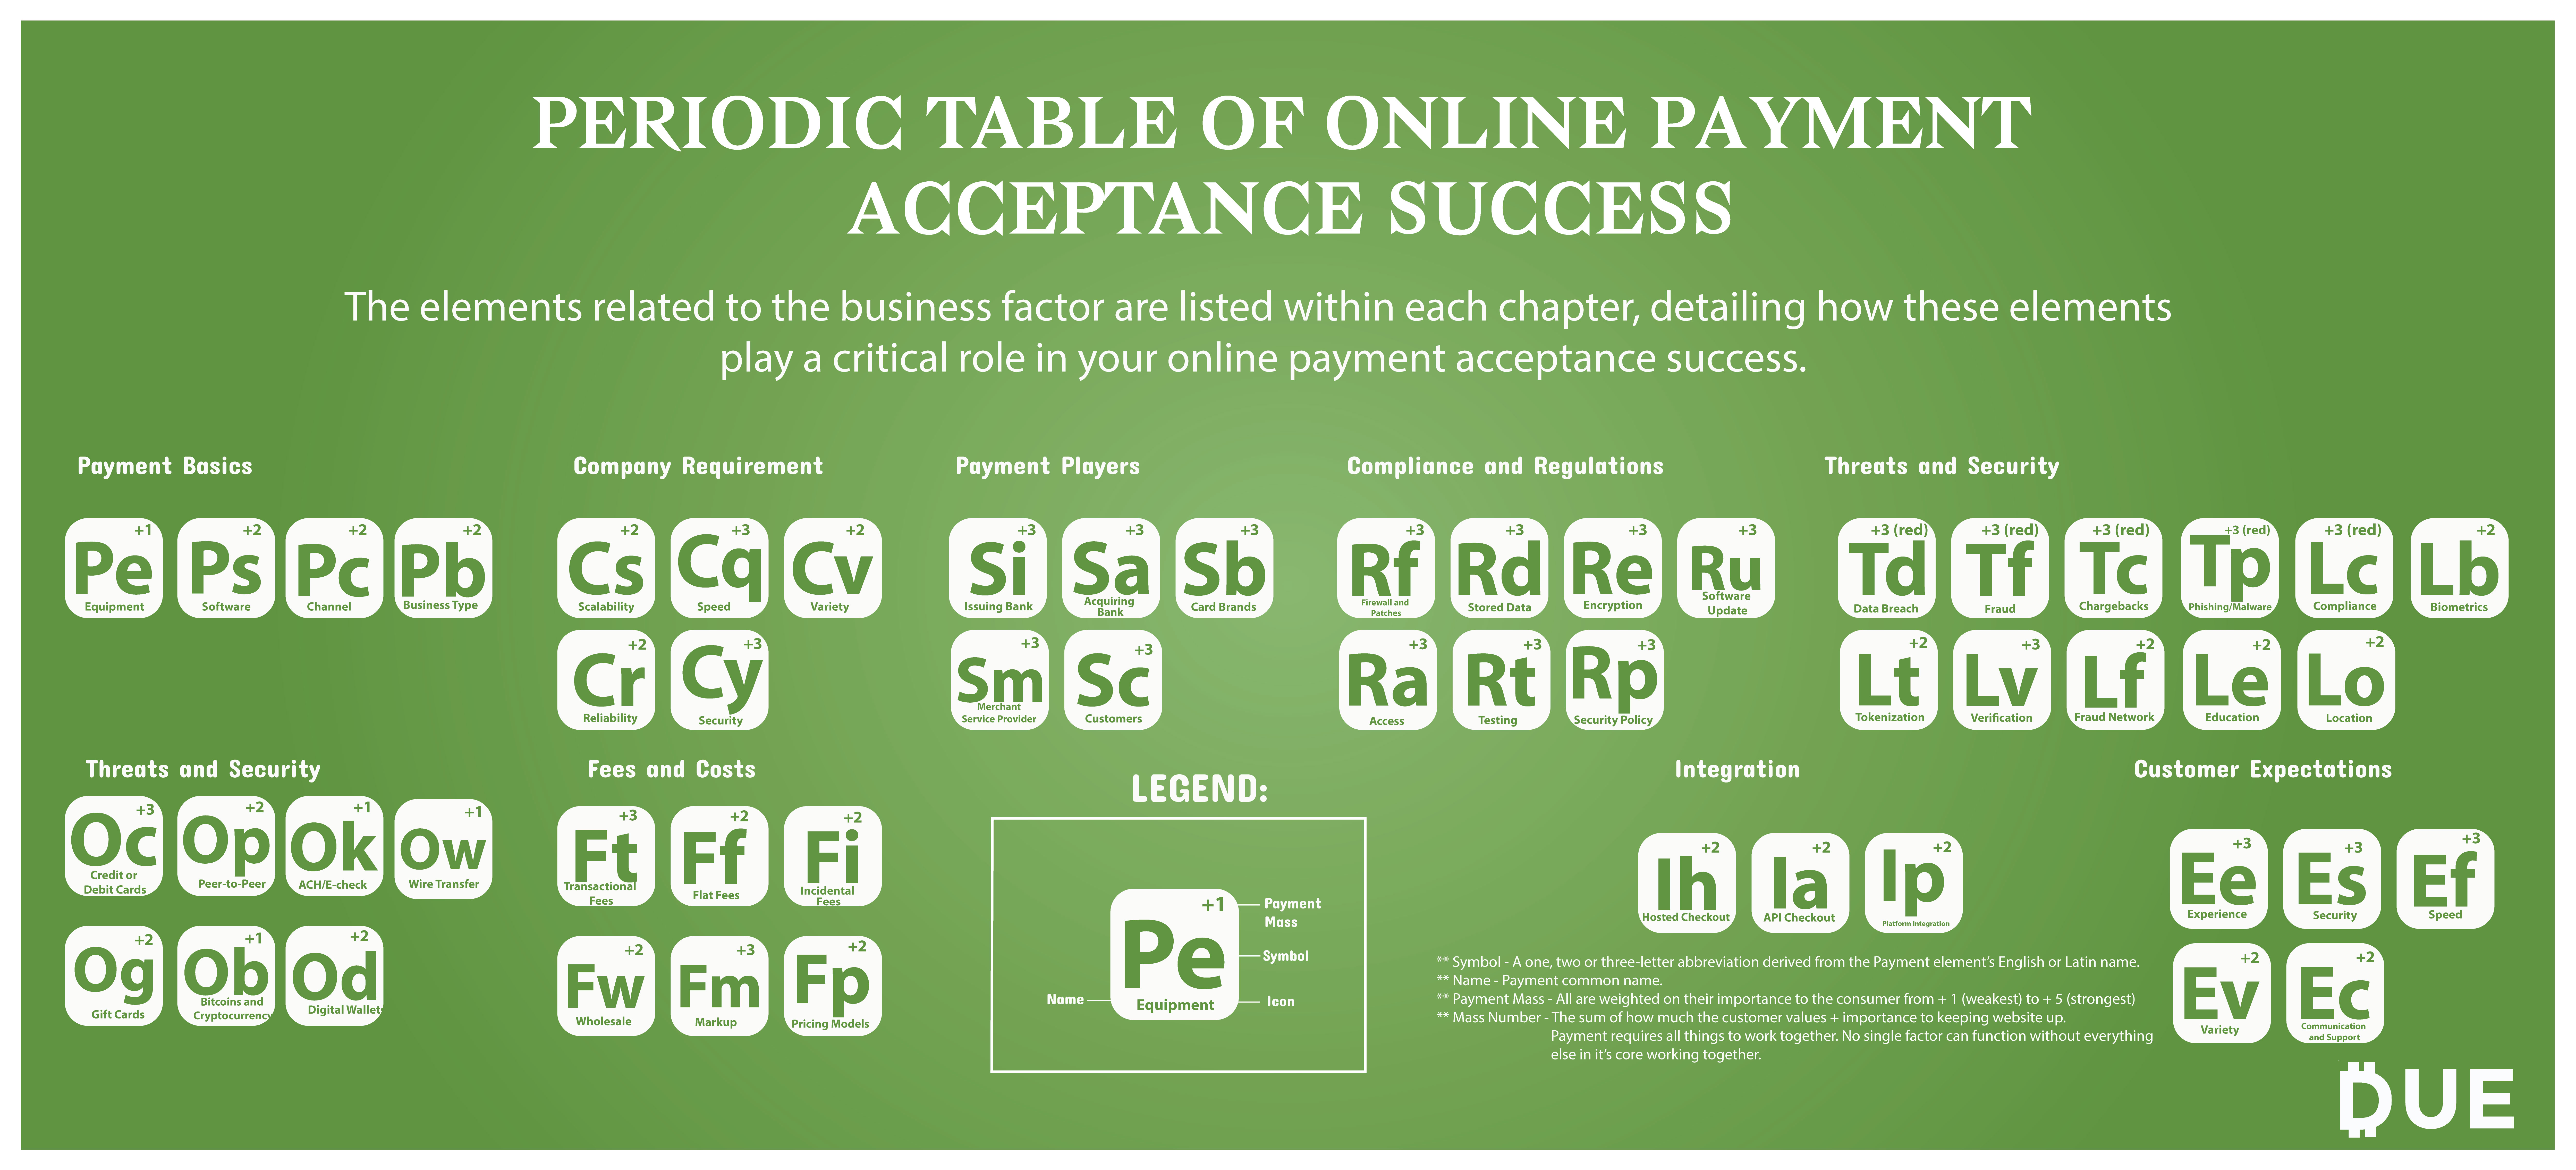 Periodic Table of Online Payment Acceptance Success